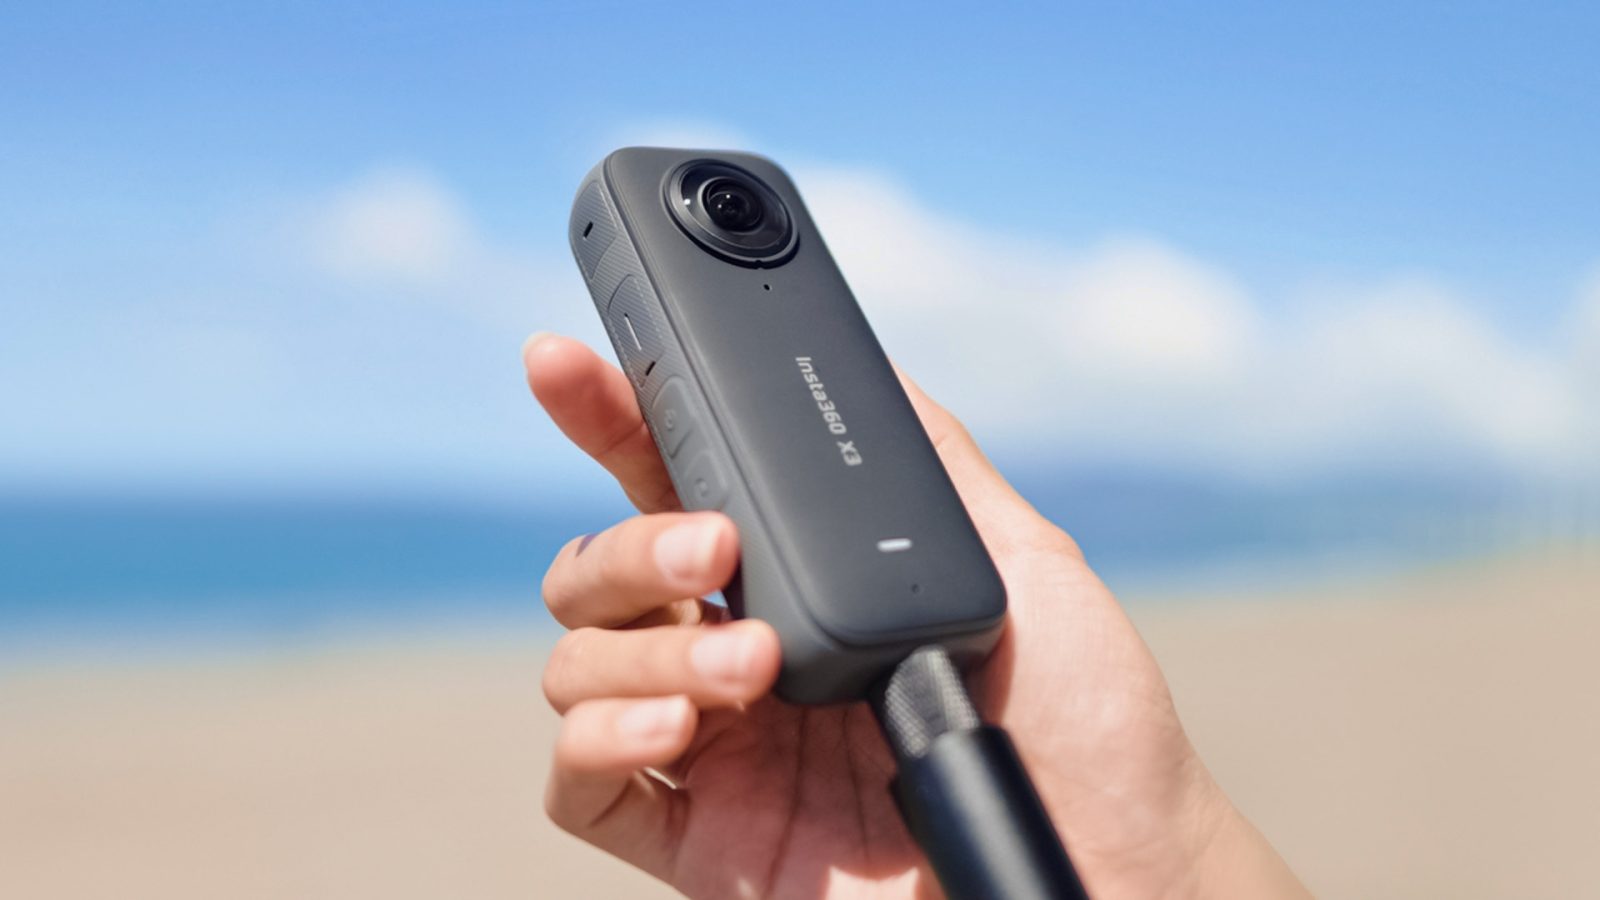 Insta360 X3 'Apple Bundle' now available for sale in Apple Stores